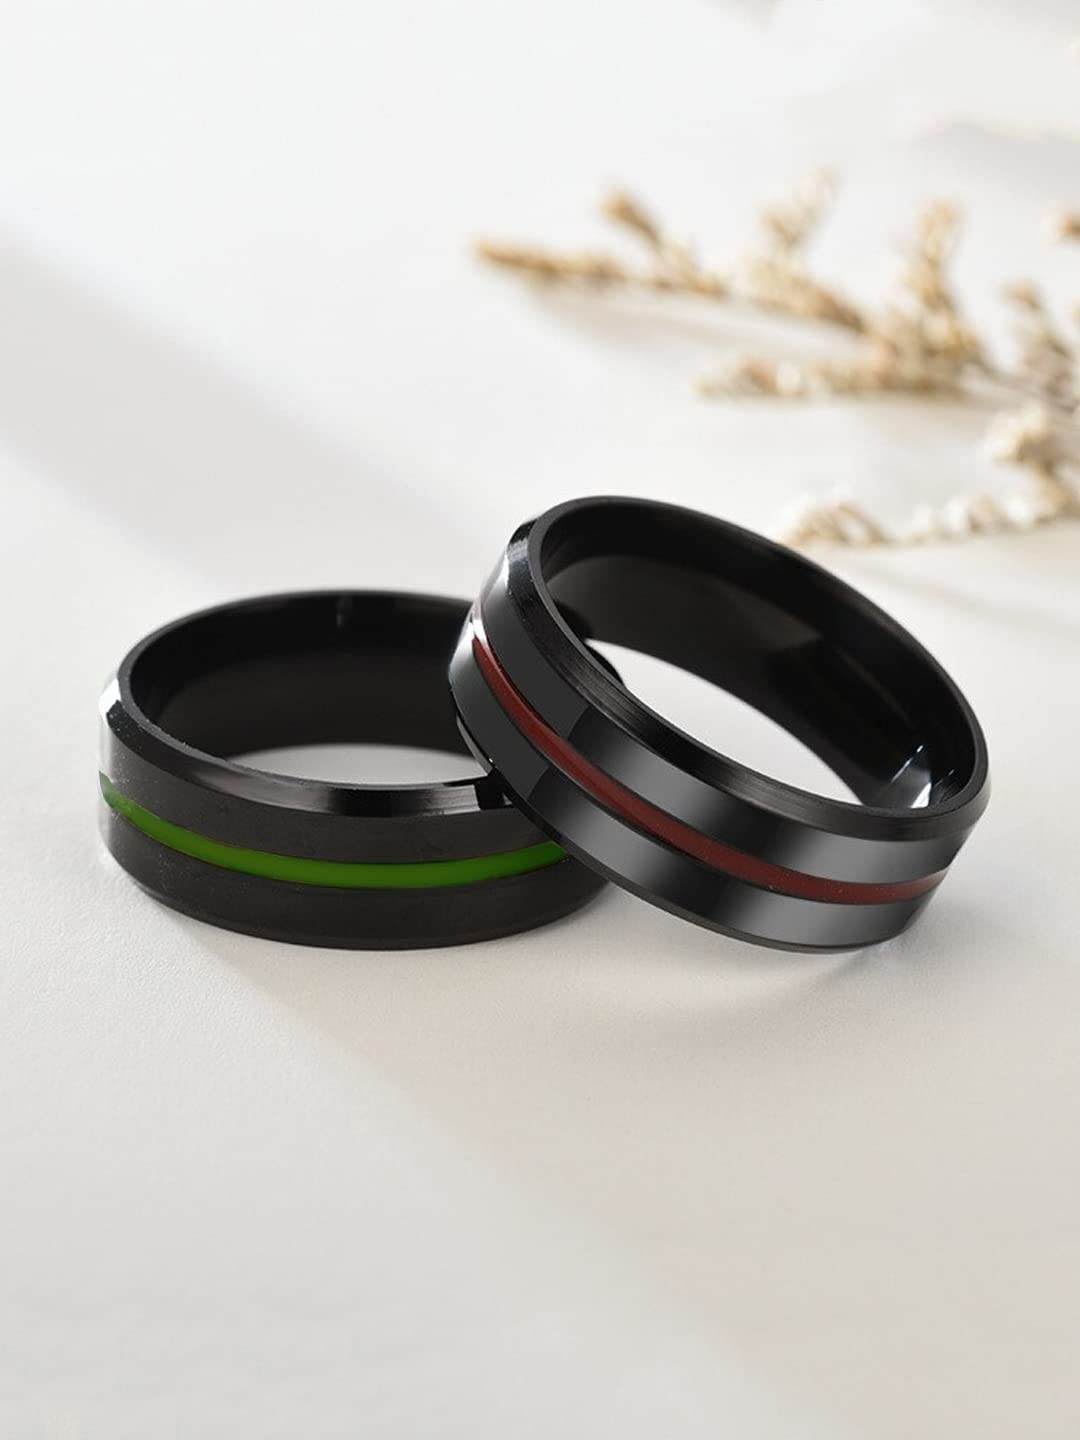 Yellow Chimes Rings for Men 2 Pcs Combo Rings Stainless Steel Rings Black Toned Grooved Center Band Rings for Men and Boys.